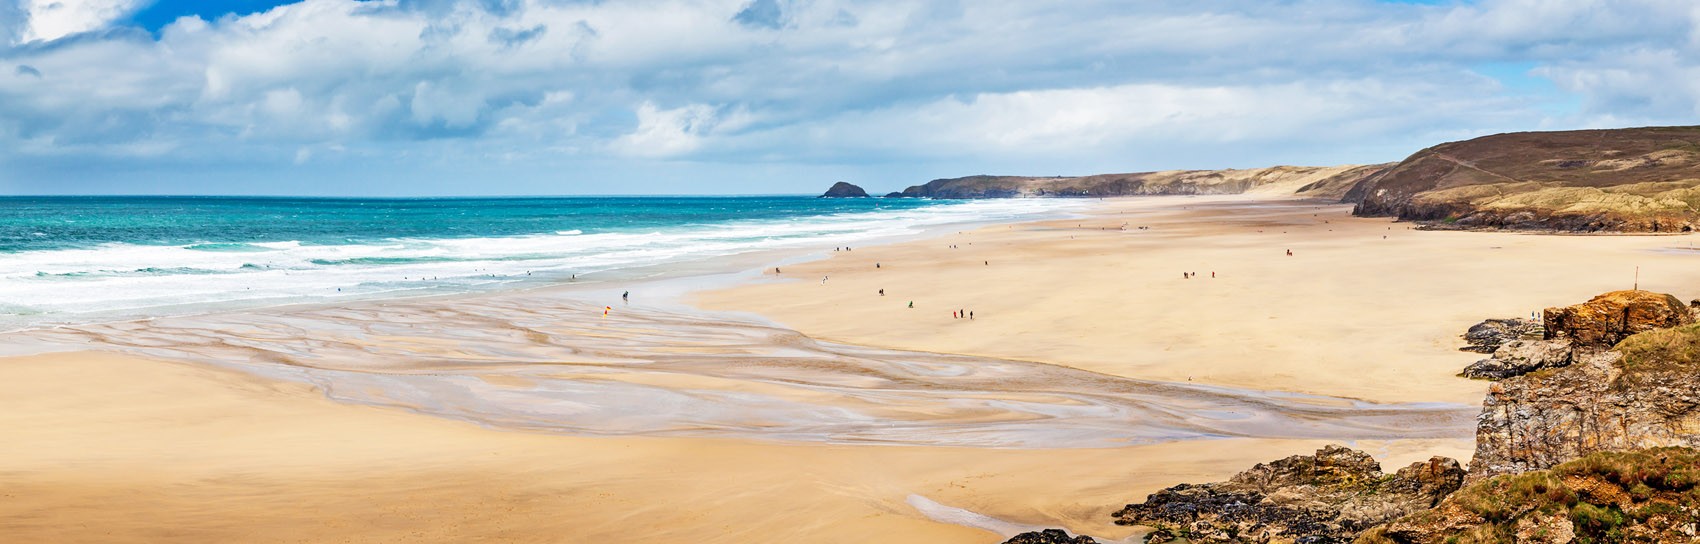 The golden, sandy beach at Perranporth. Photograph by IAN WOOLCOCK